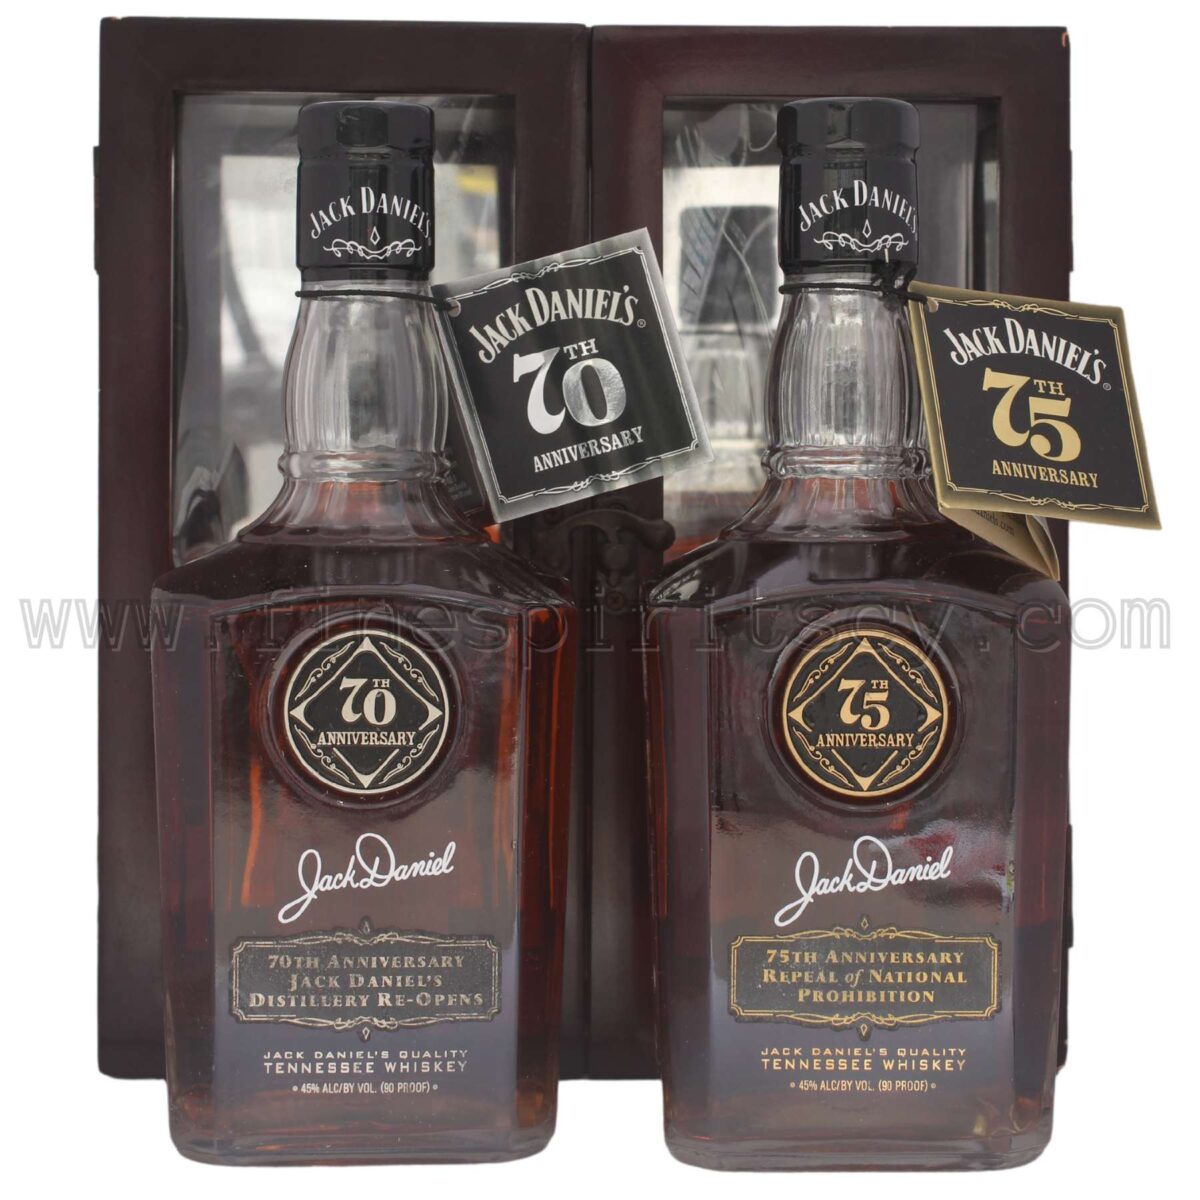 Jack Daniels 70th cyprus Anniversary reopens 75th anniversary prohibition